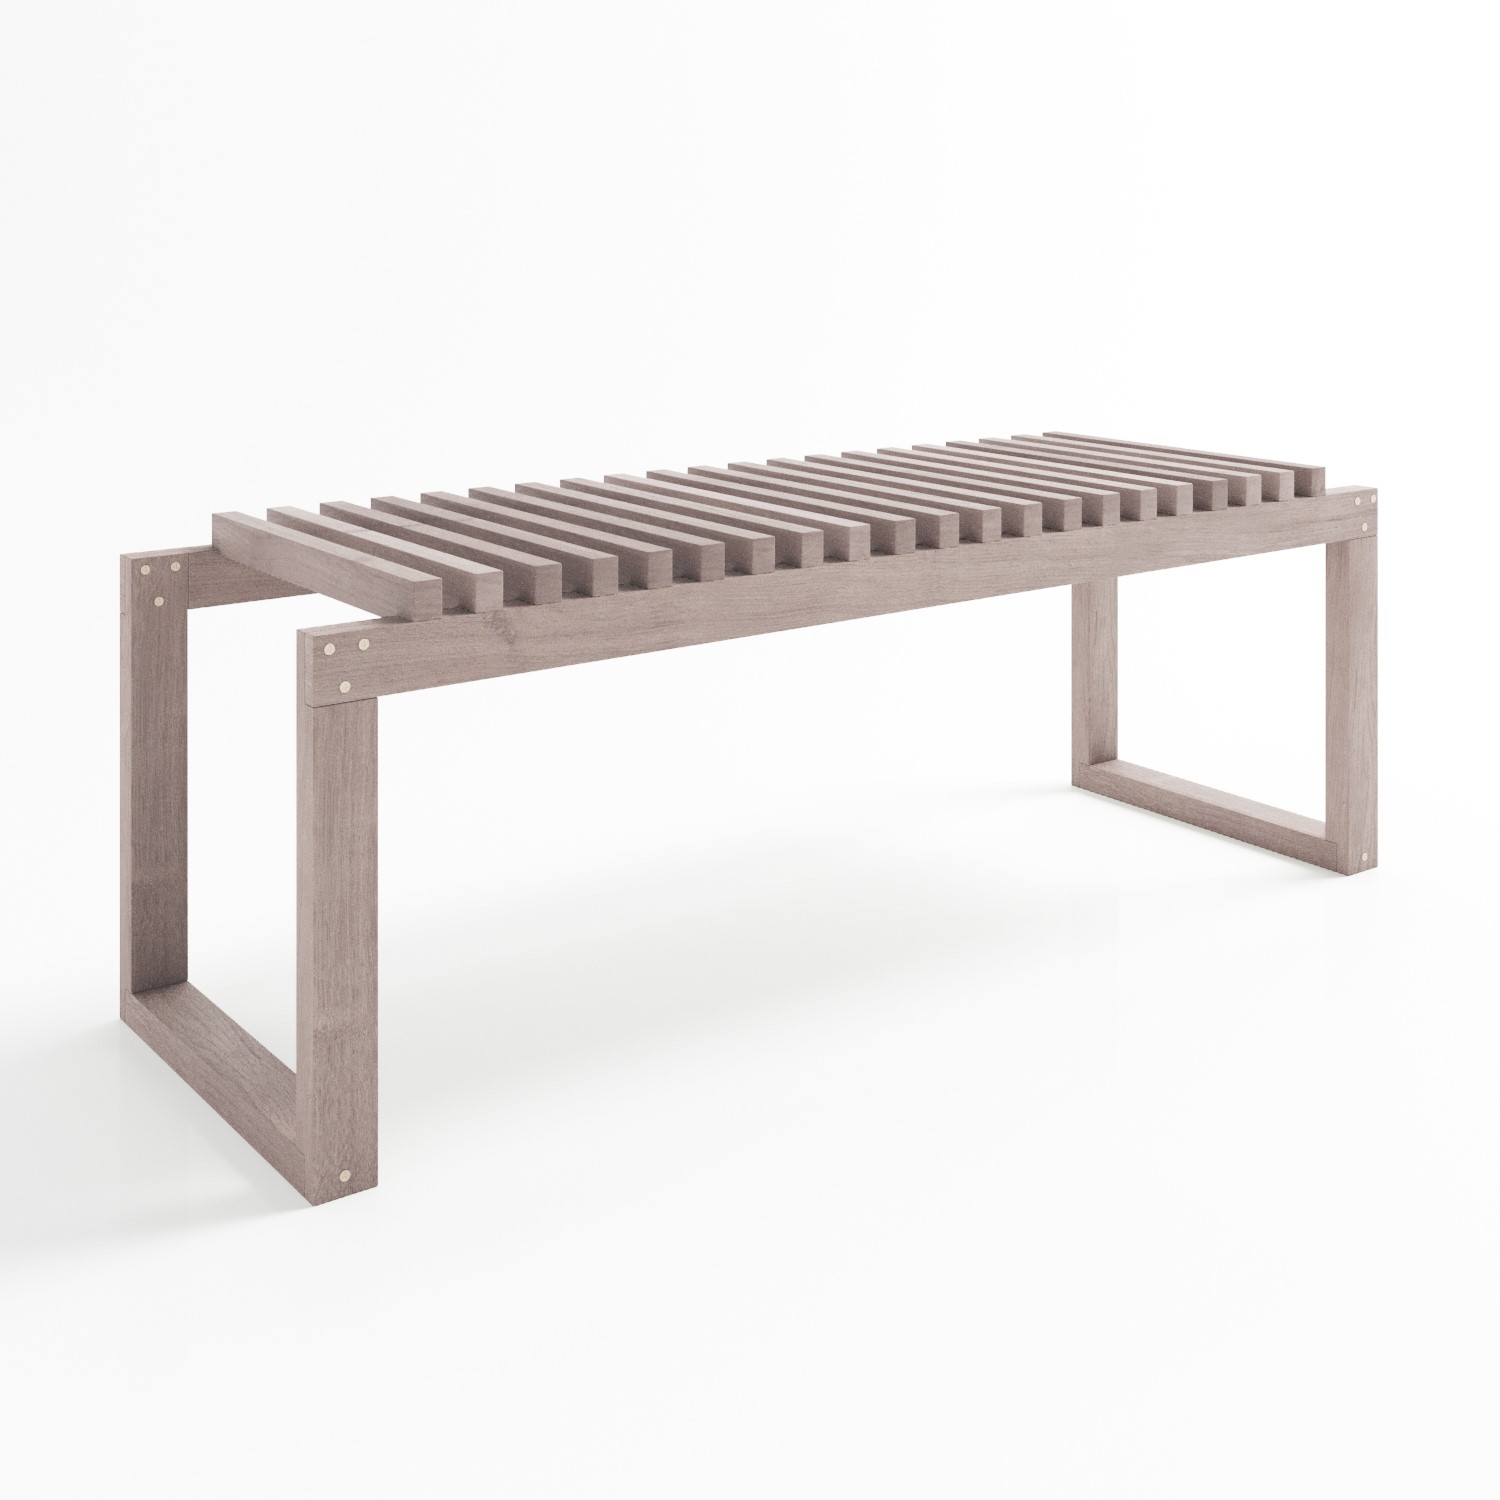 Read more about 2 seater solid beech cutter bench120 x 40cm como